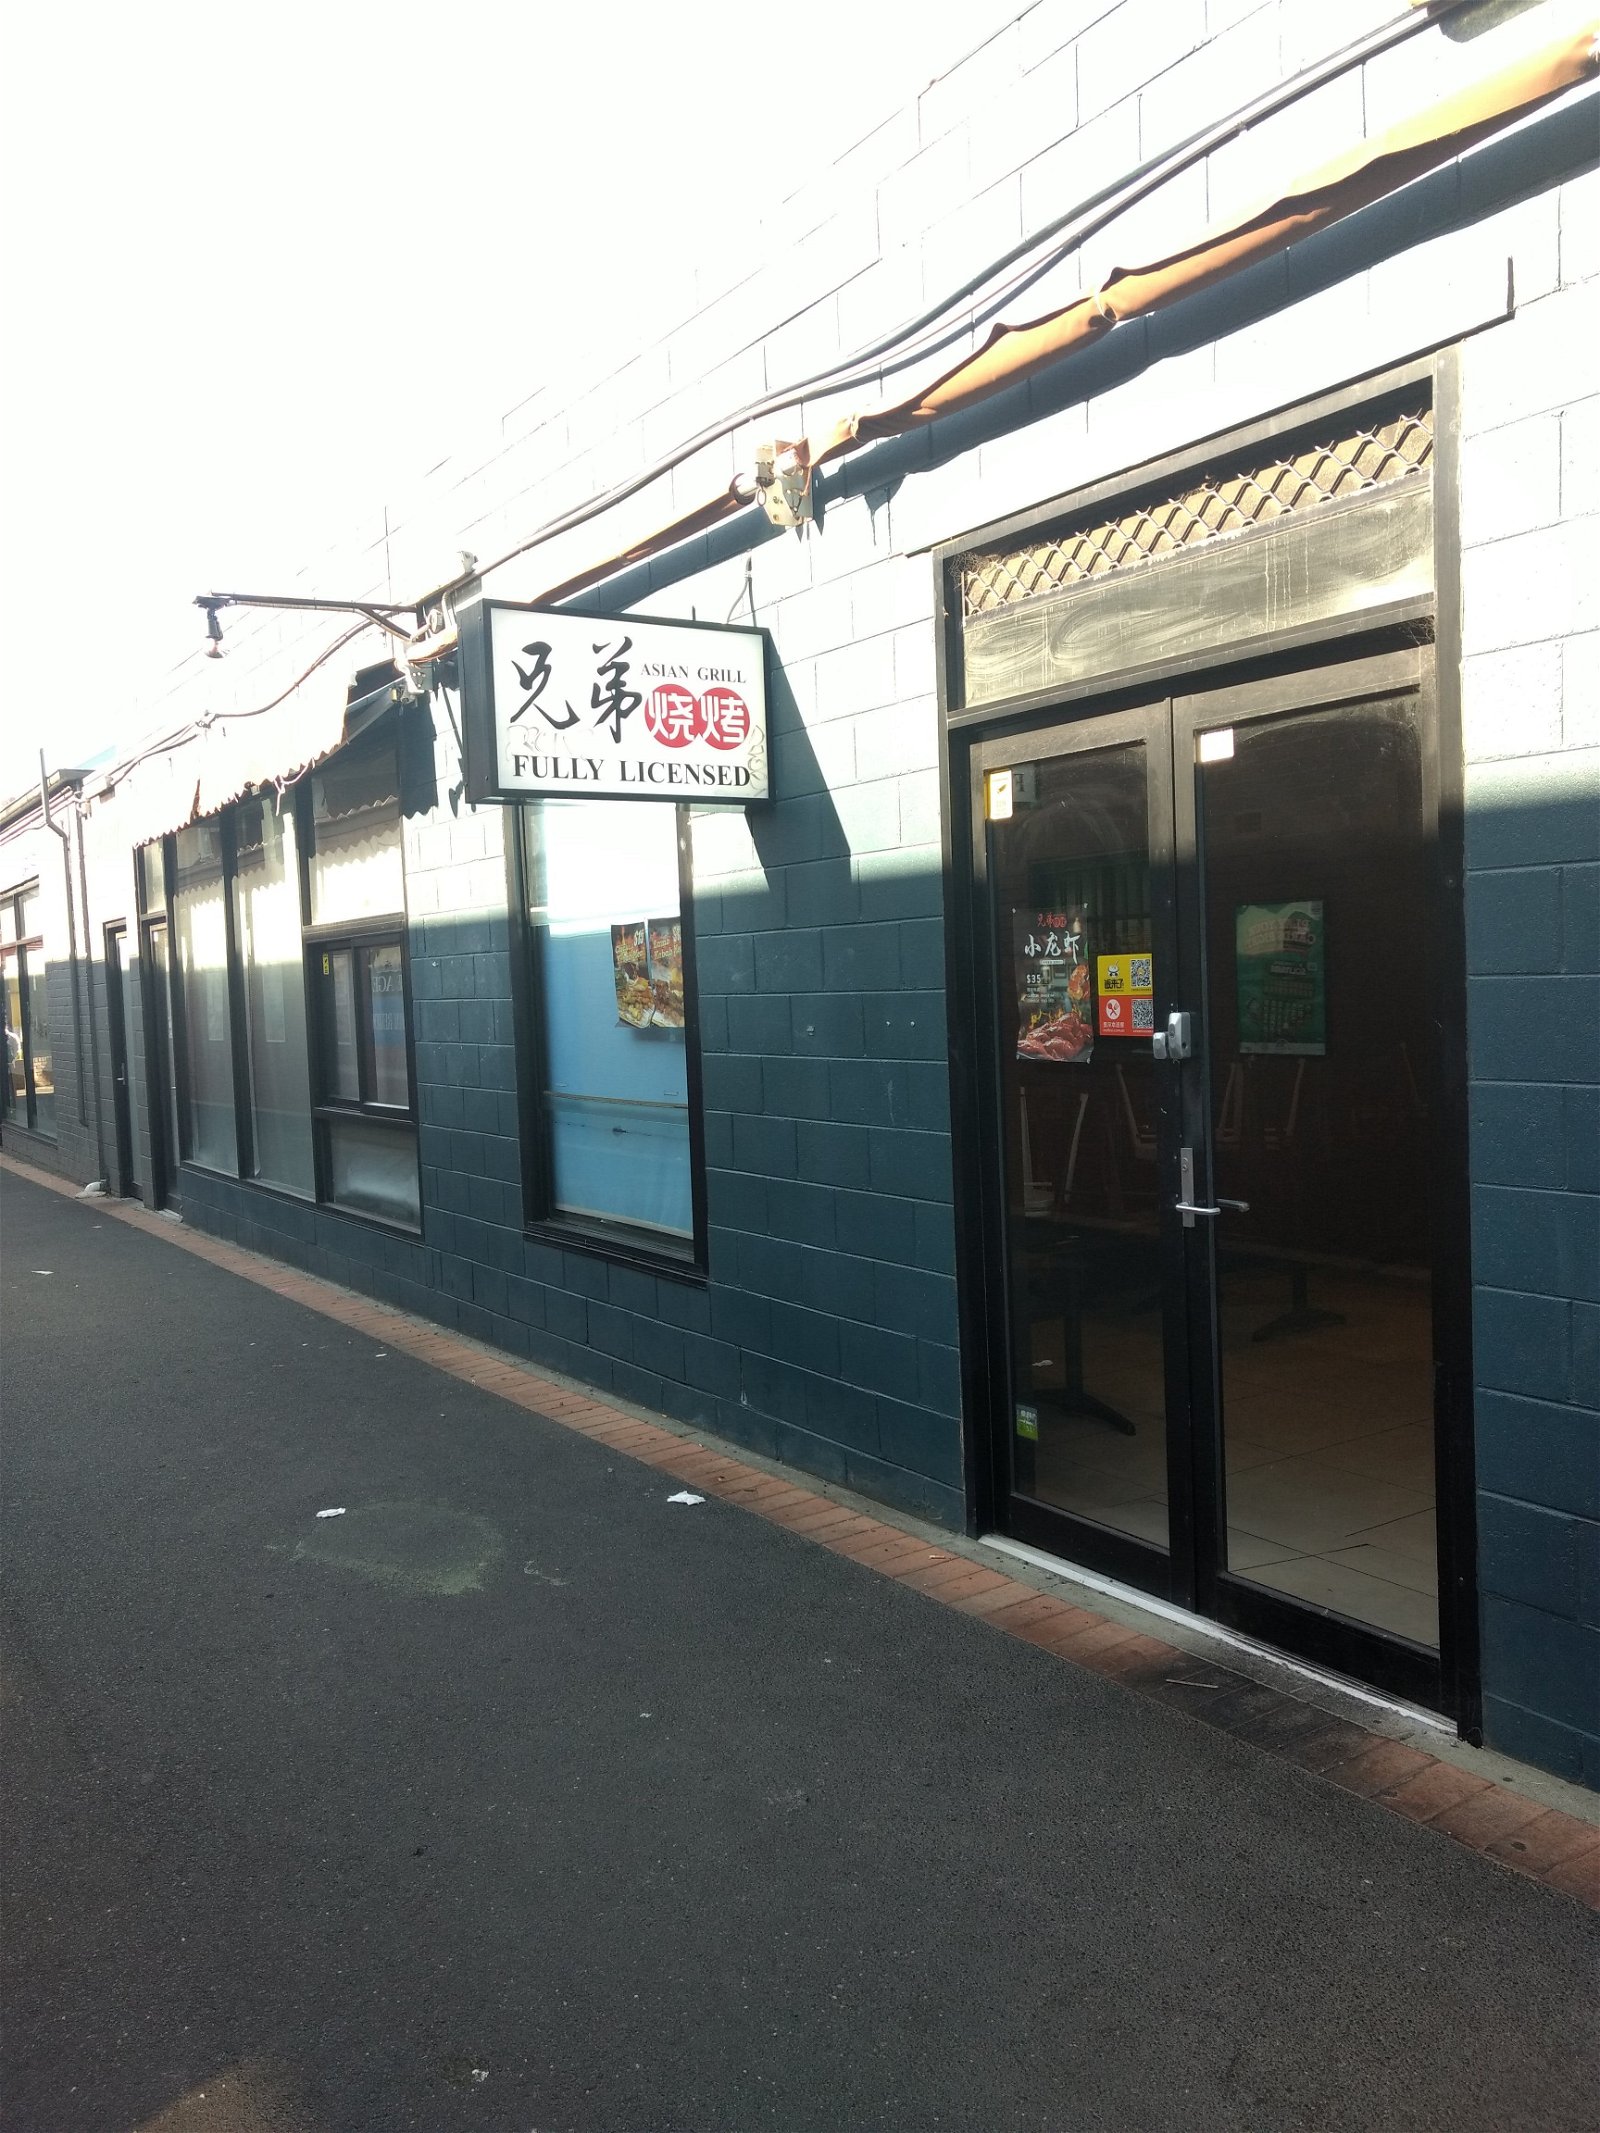 Asian Grill - Northern Rivers Accommodation